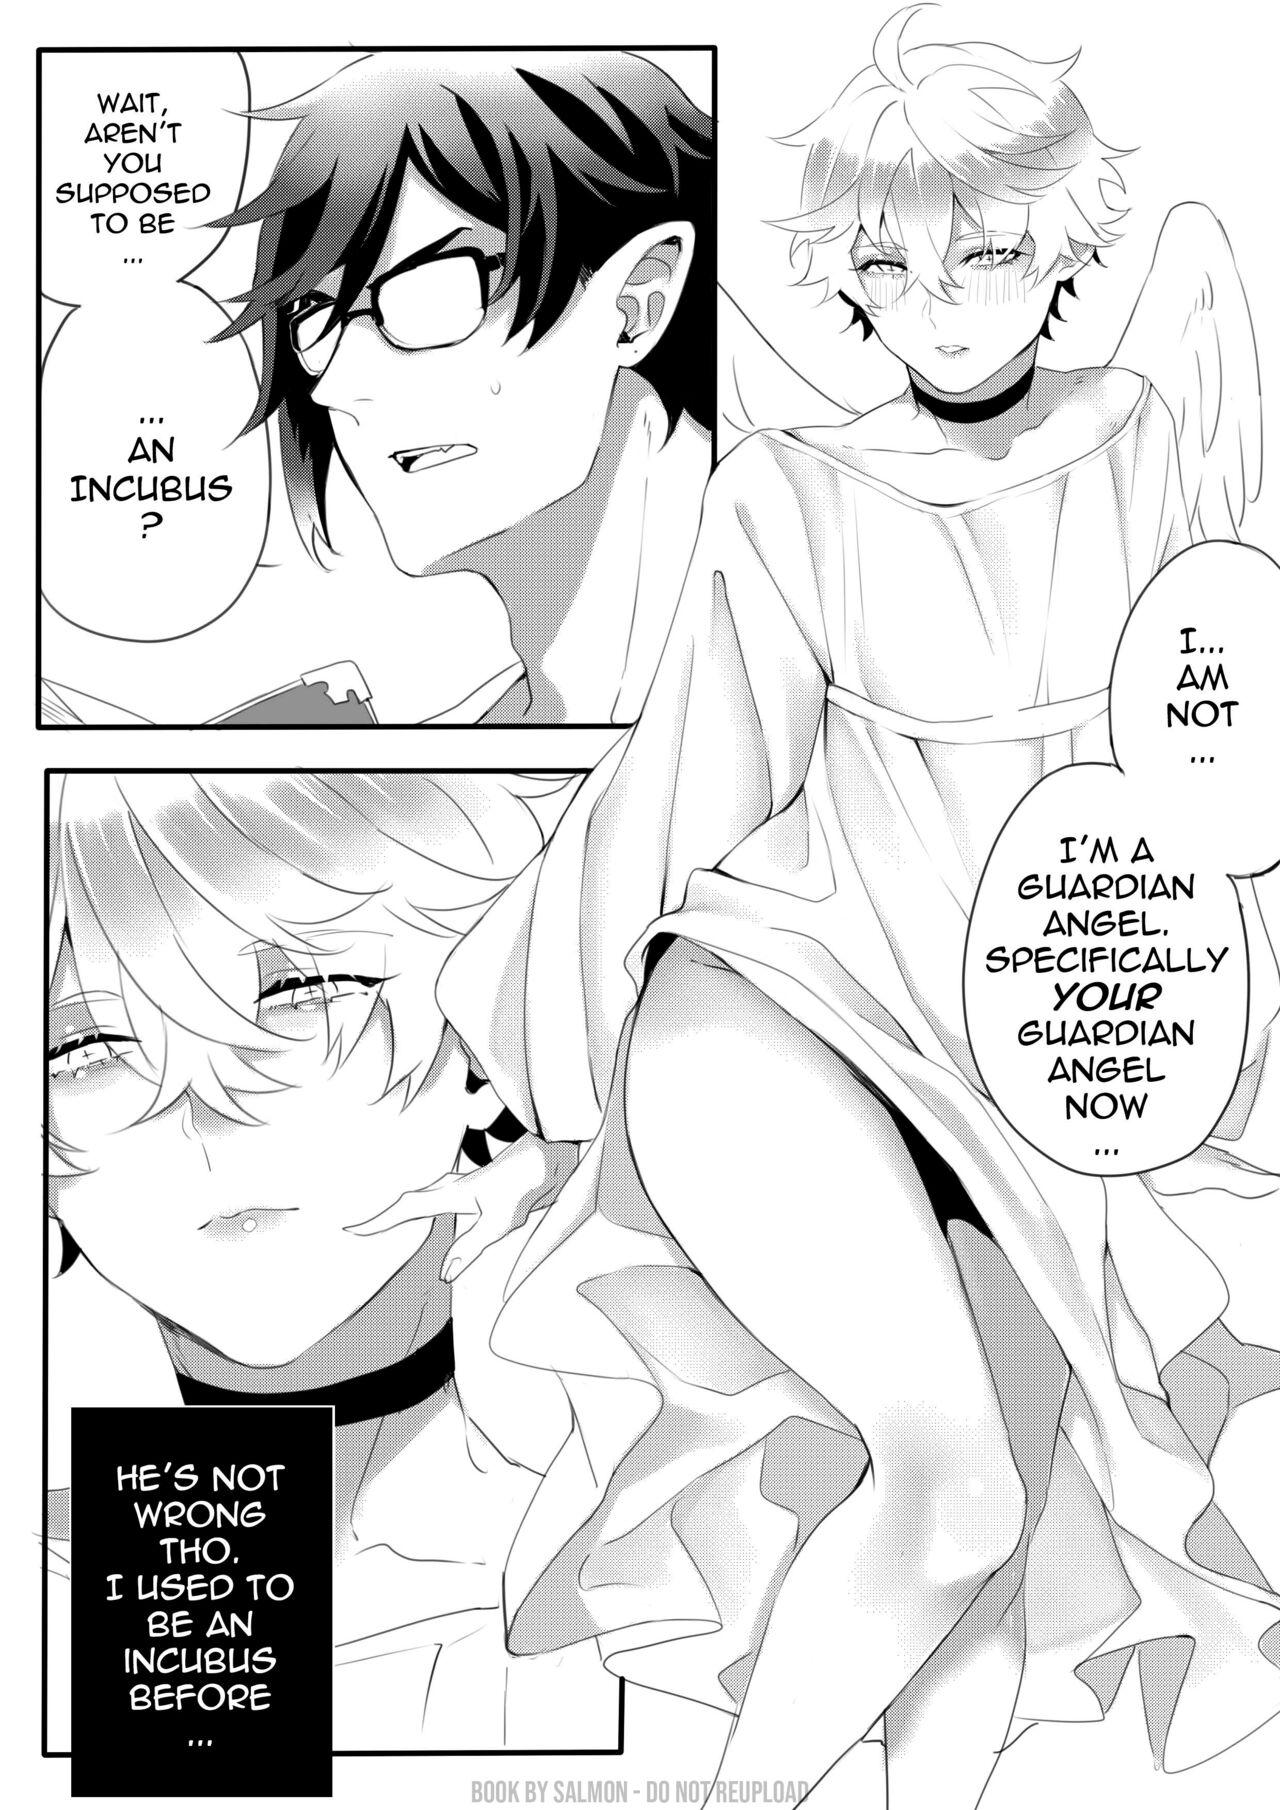 Gay Group My Little Guardian Angel - Genshin impact 3some - Page 7